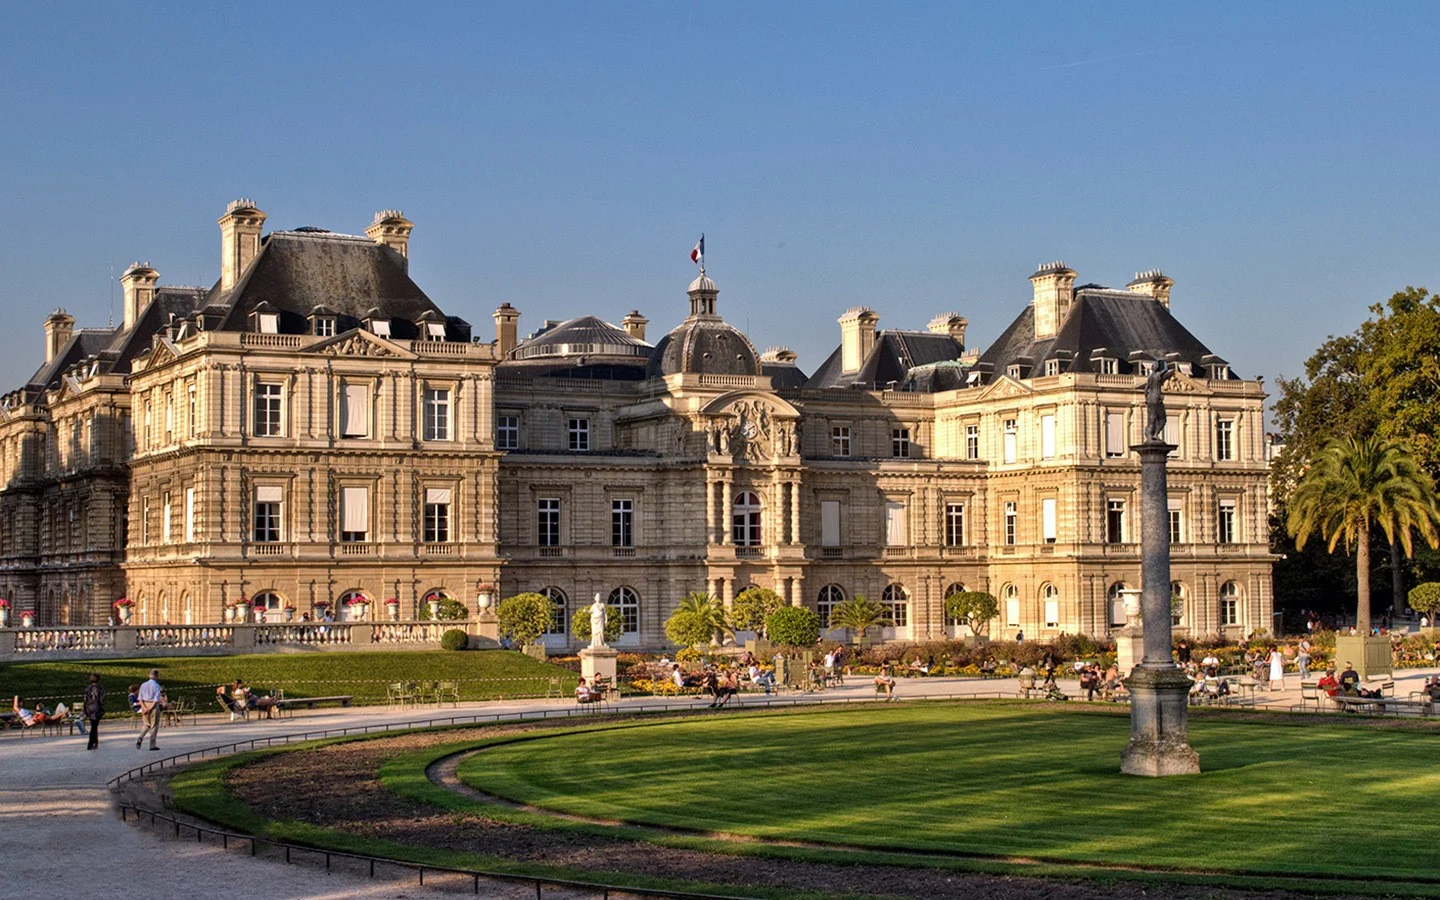 The Luxembourg Palace and gardens on a self-guided St Germain walking tour